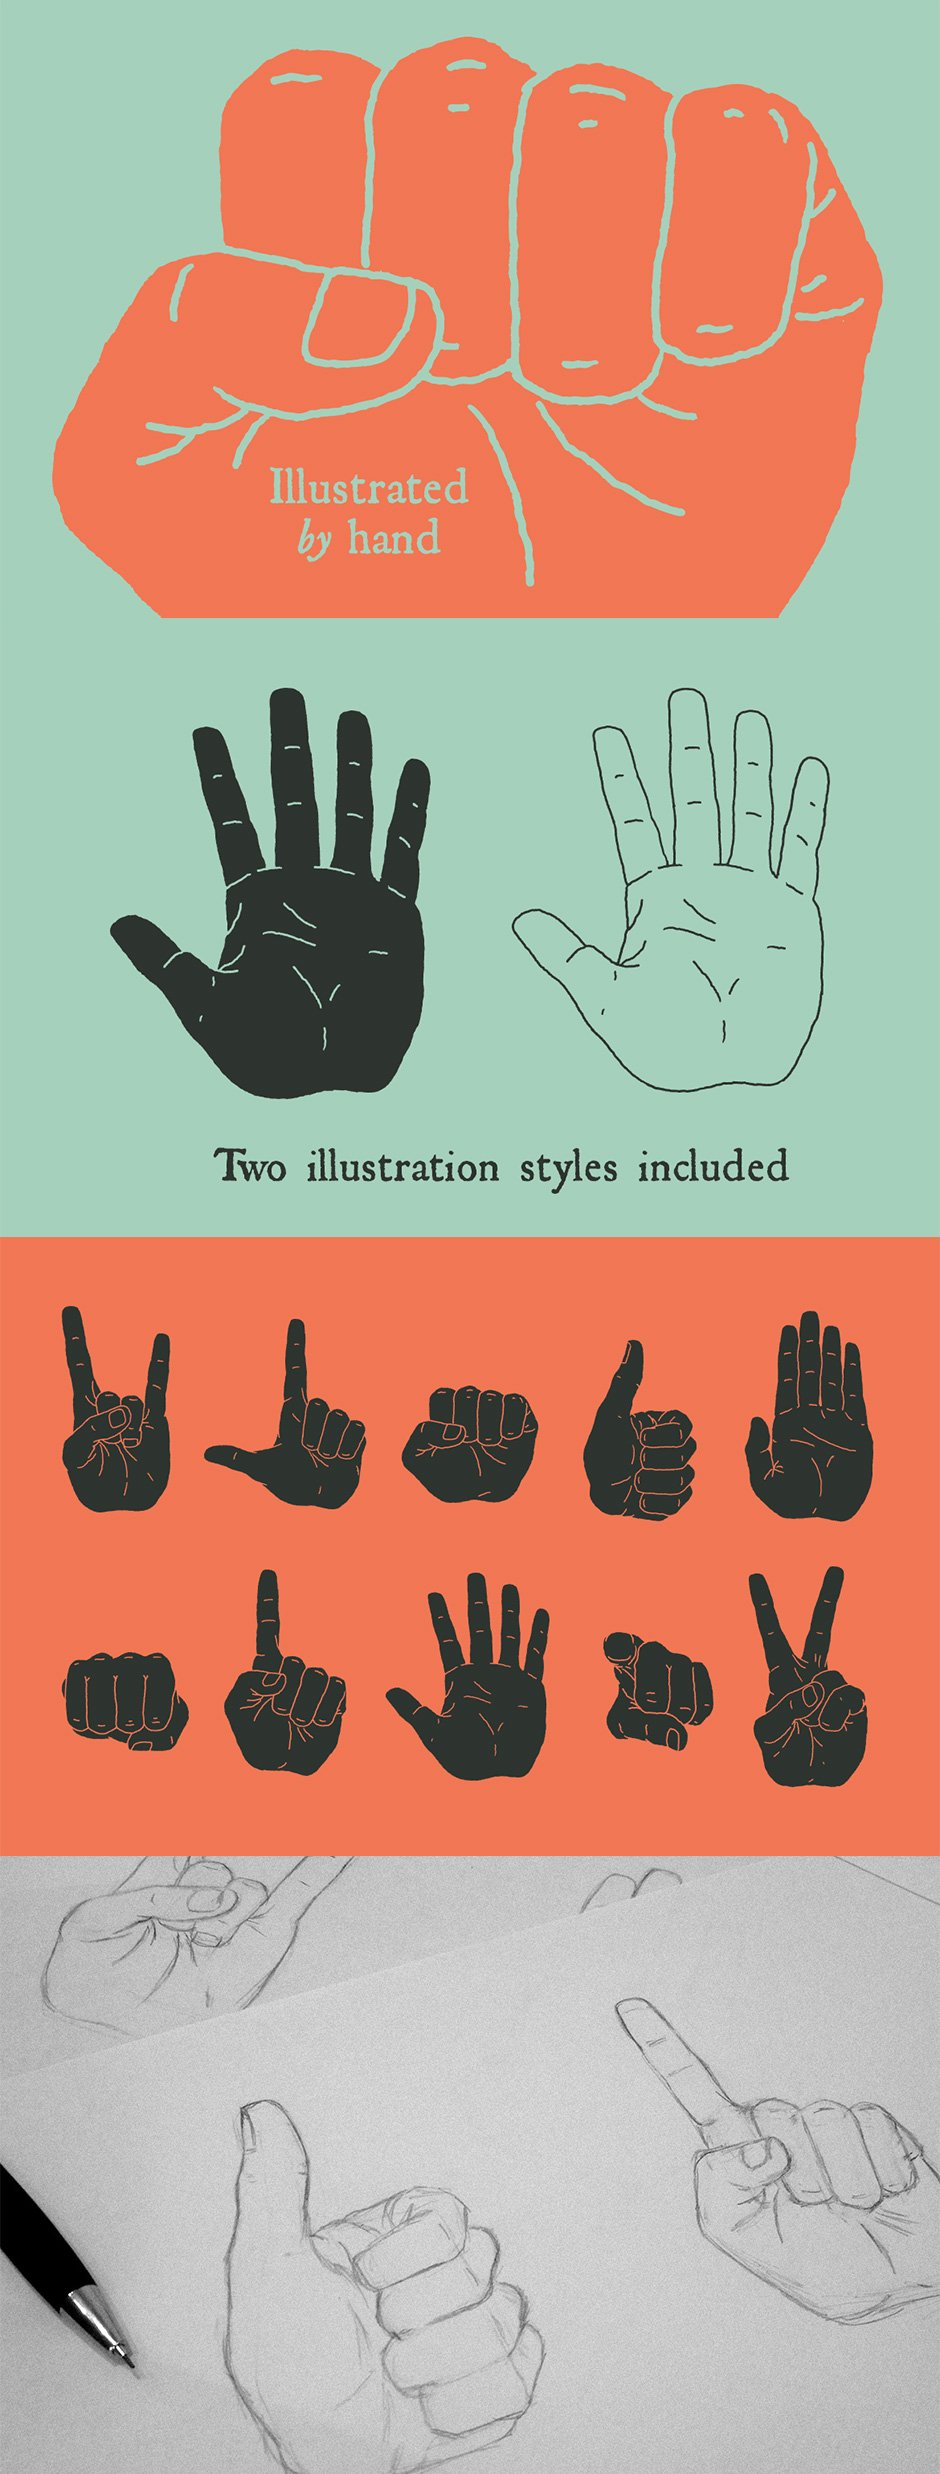 10 Hand Illustrated Hands and Fists